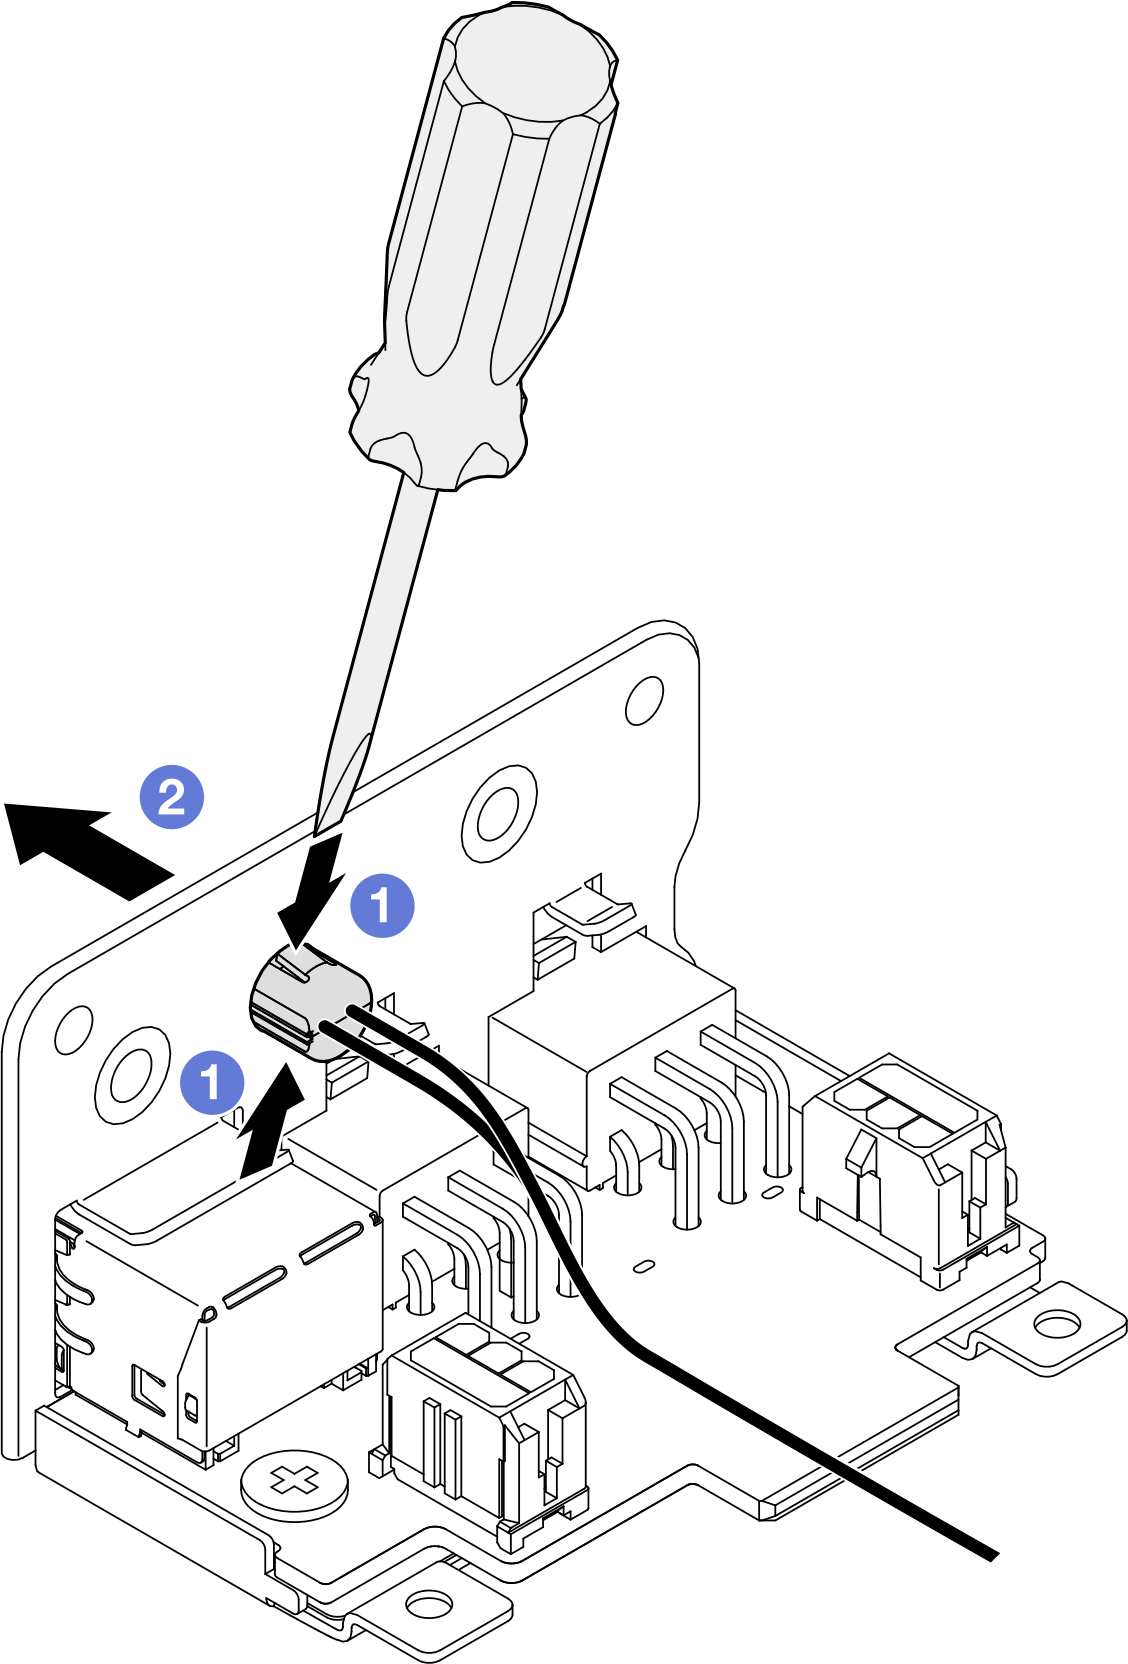 Removing the LED cable from power input board module